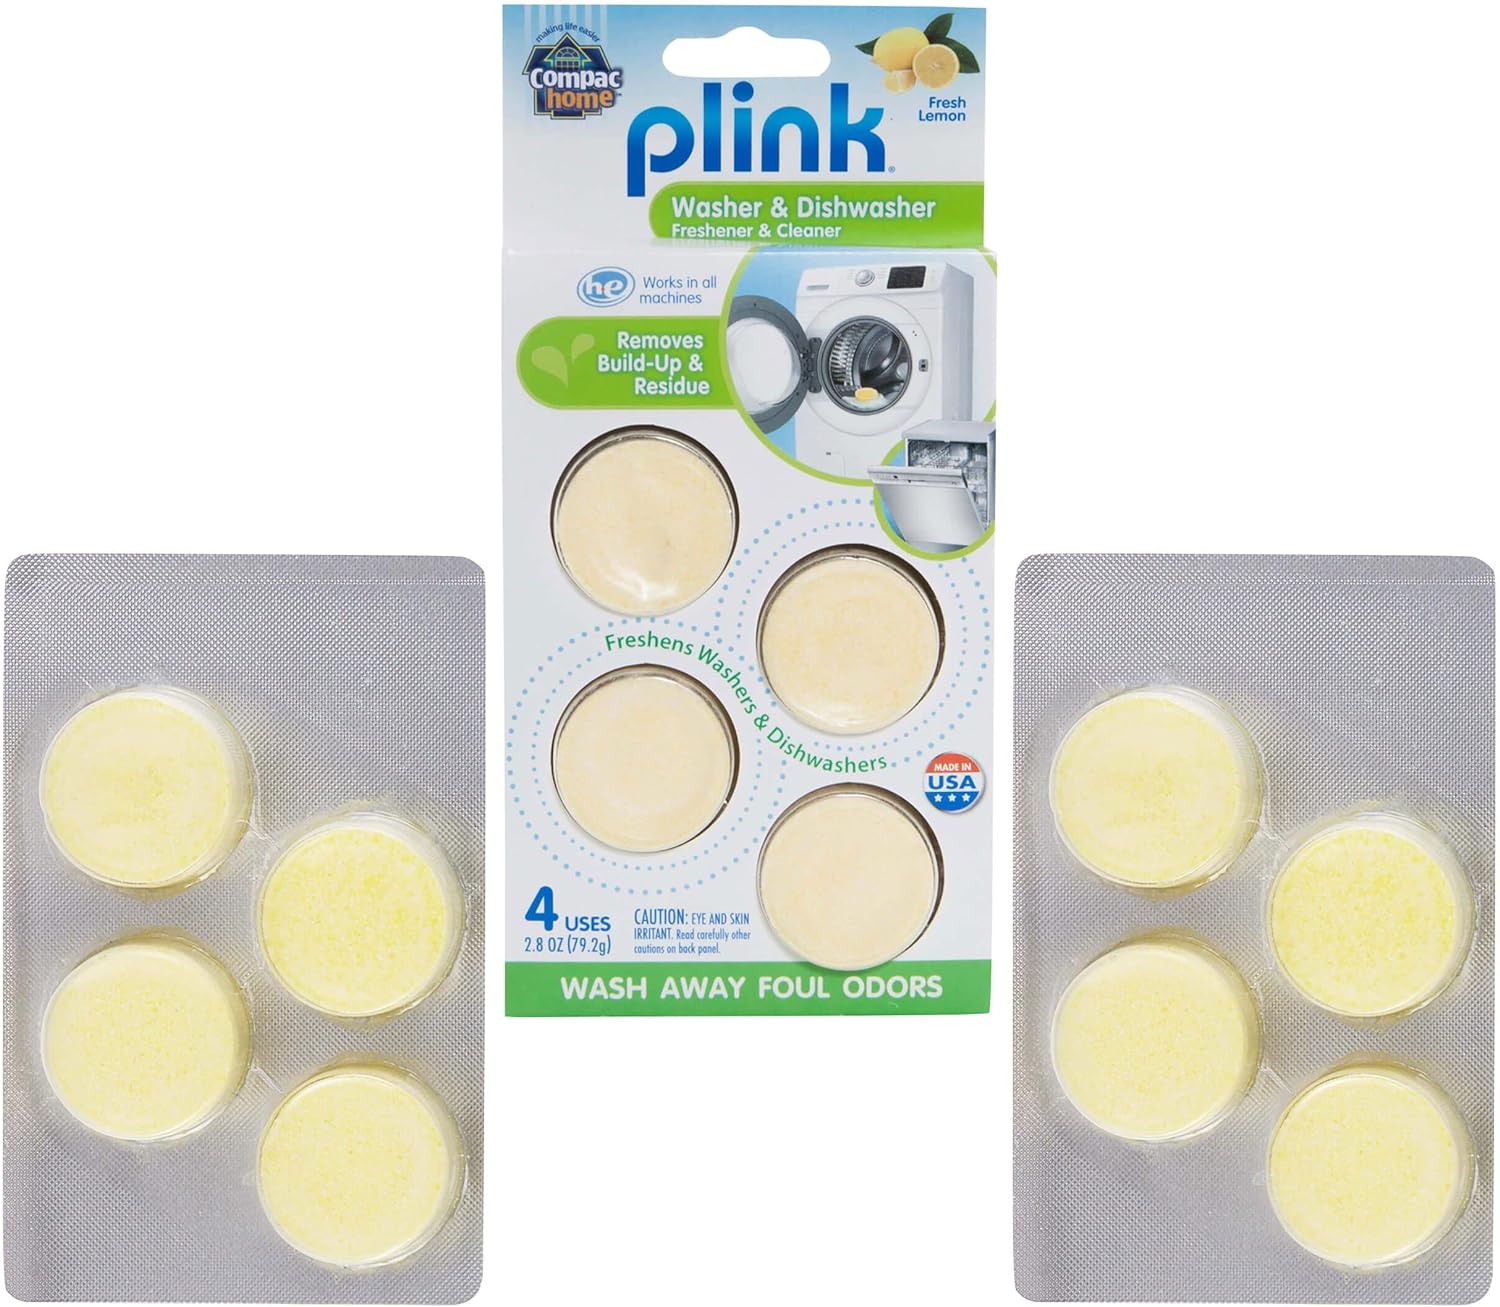 Compac Home Plink Appliance Freshener, Dishwasher, Washing Machine Cleaner, Water Activated, Fresh Lemon Scent, 12 Count